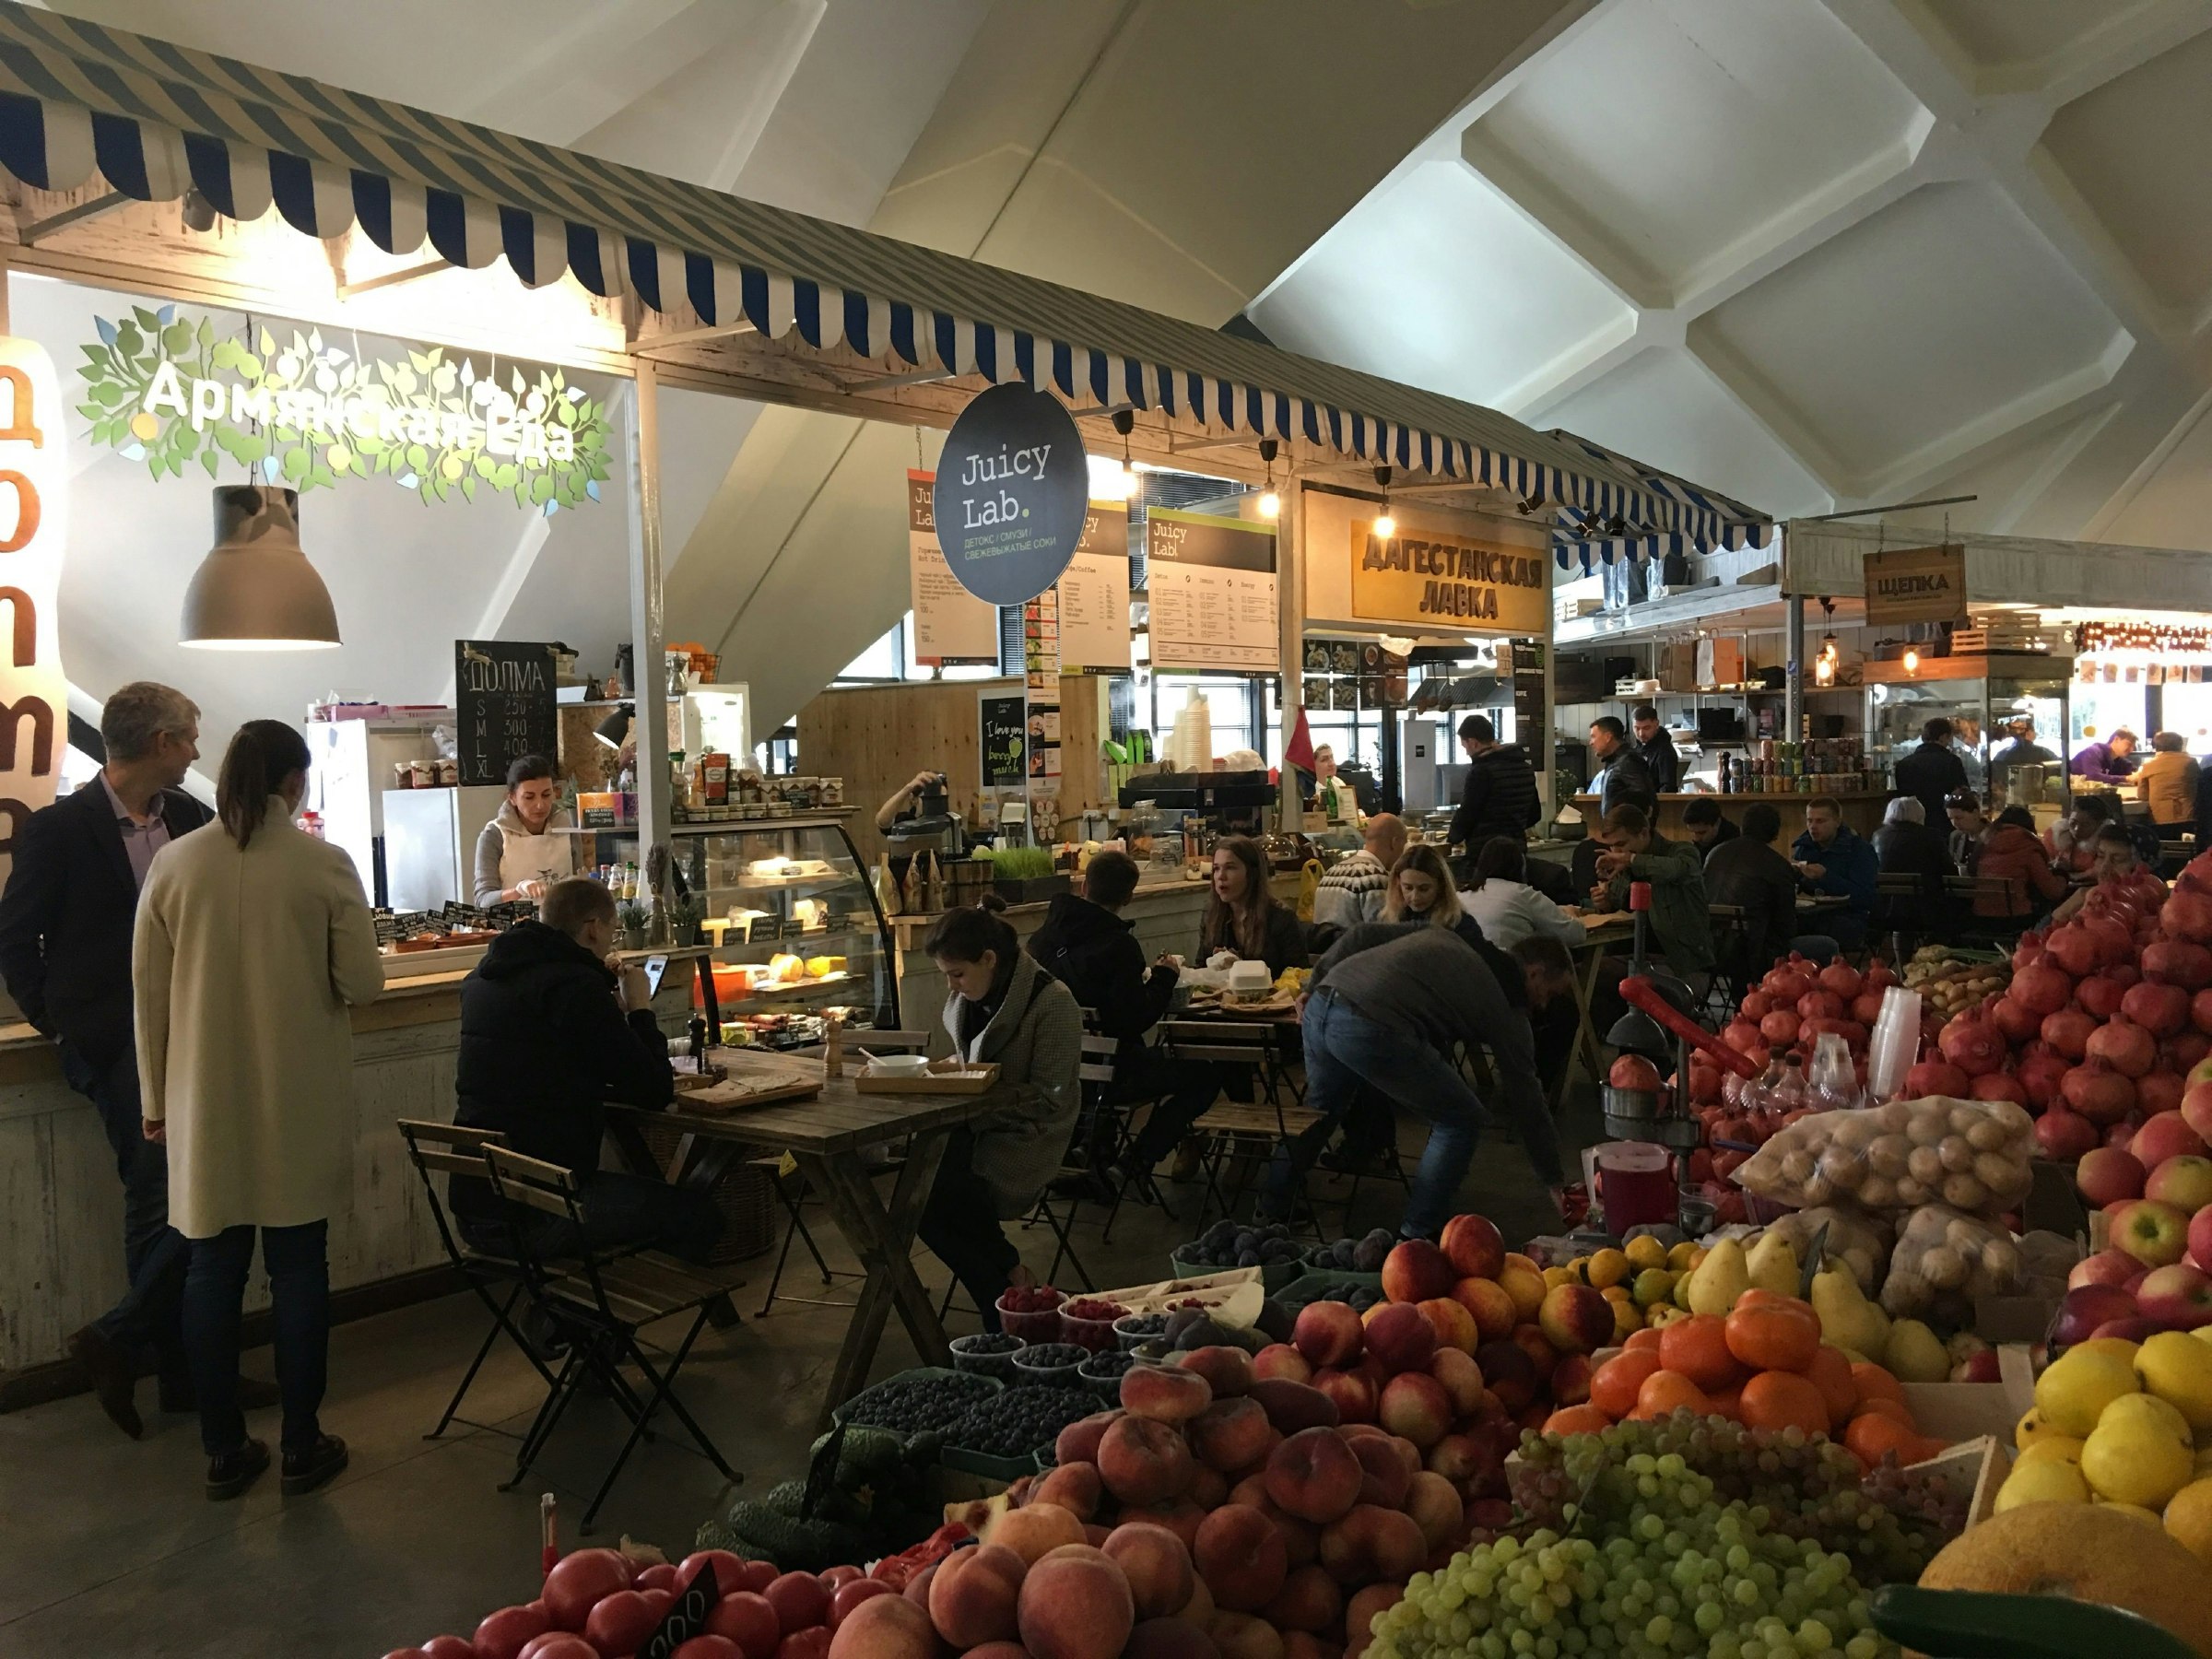 Cafes and food stalls in a covered market. There are piles of fruits and vegetables in the foreground